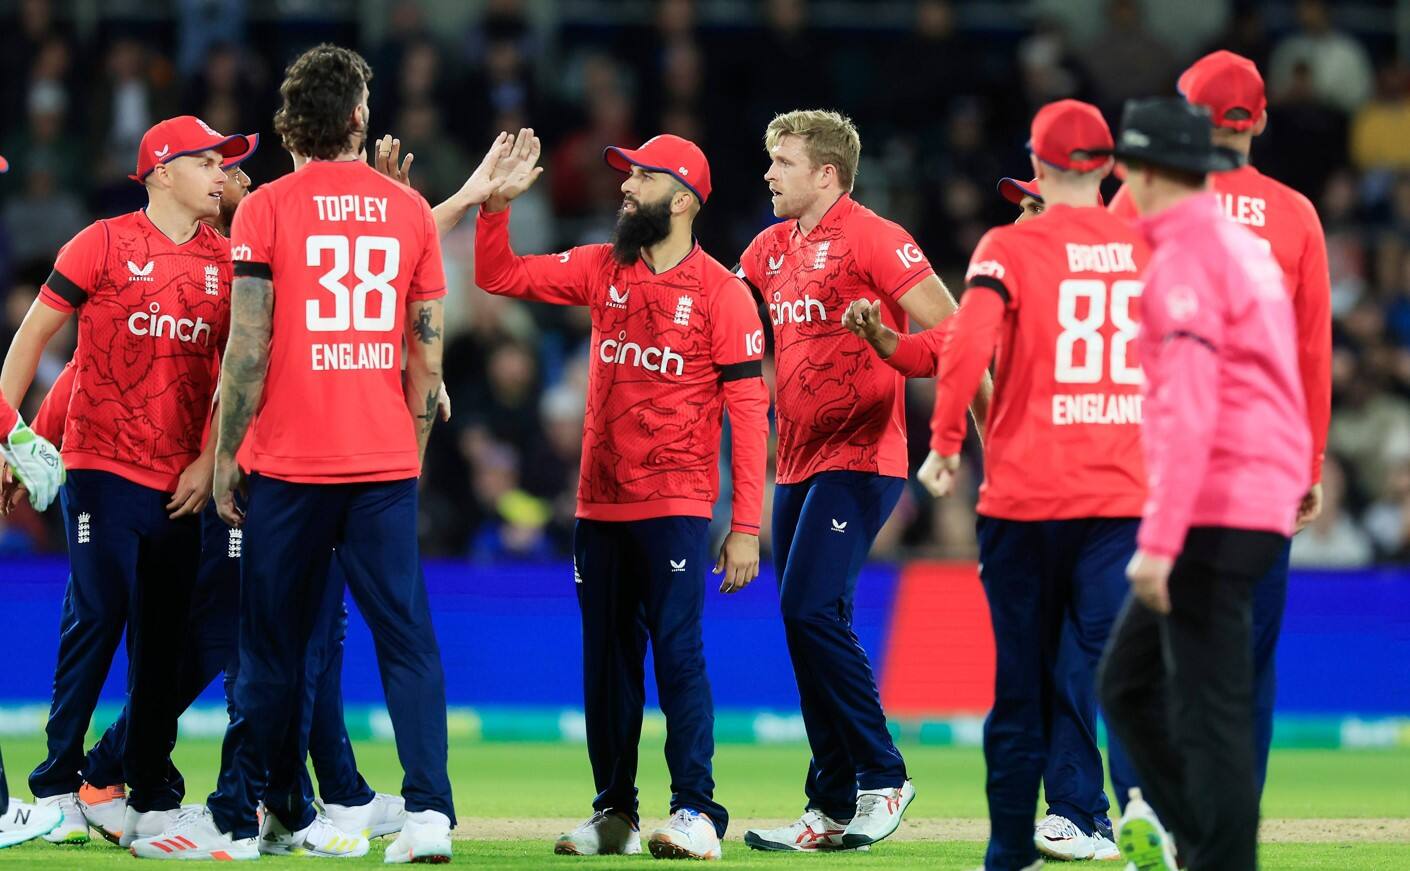 AUS vs ENG 2022: Sam Curran holds off Wade & David threat as England sail to series win